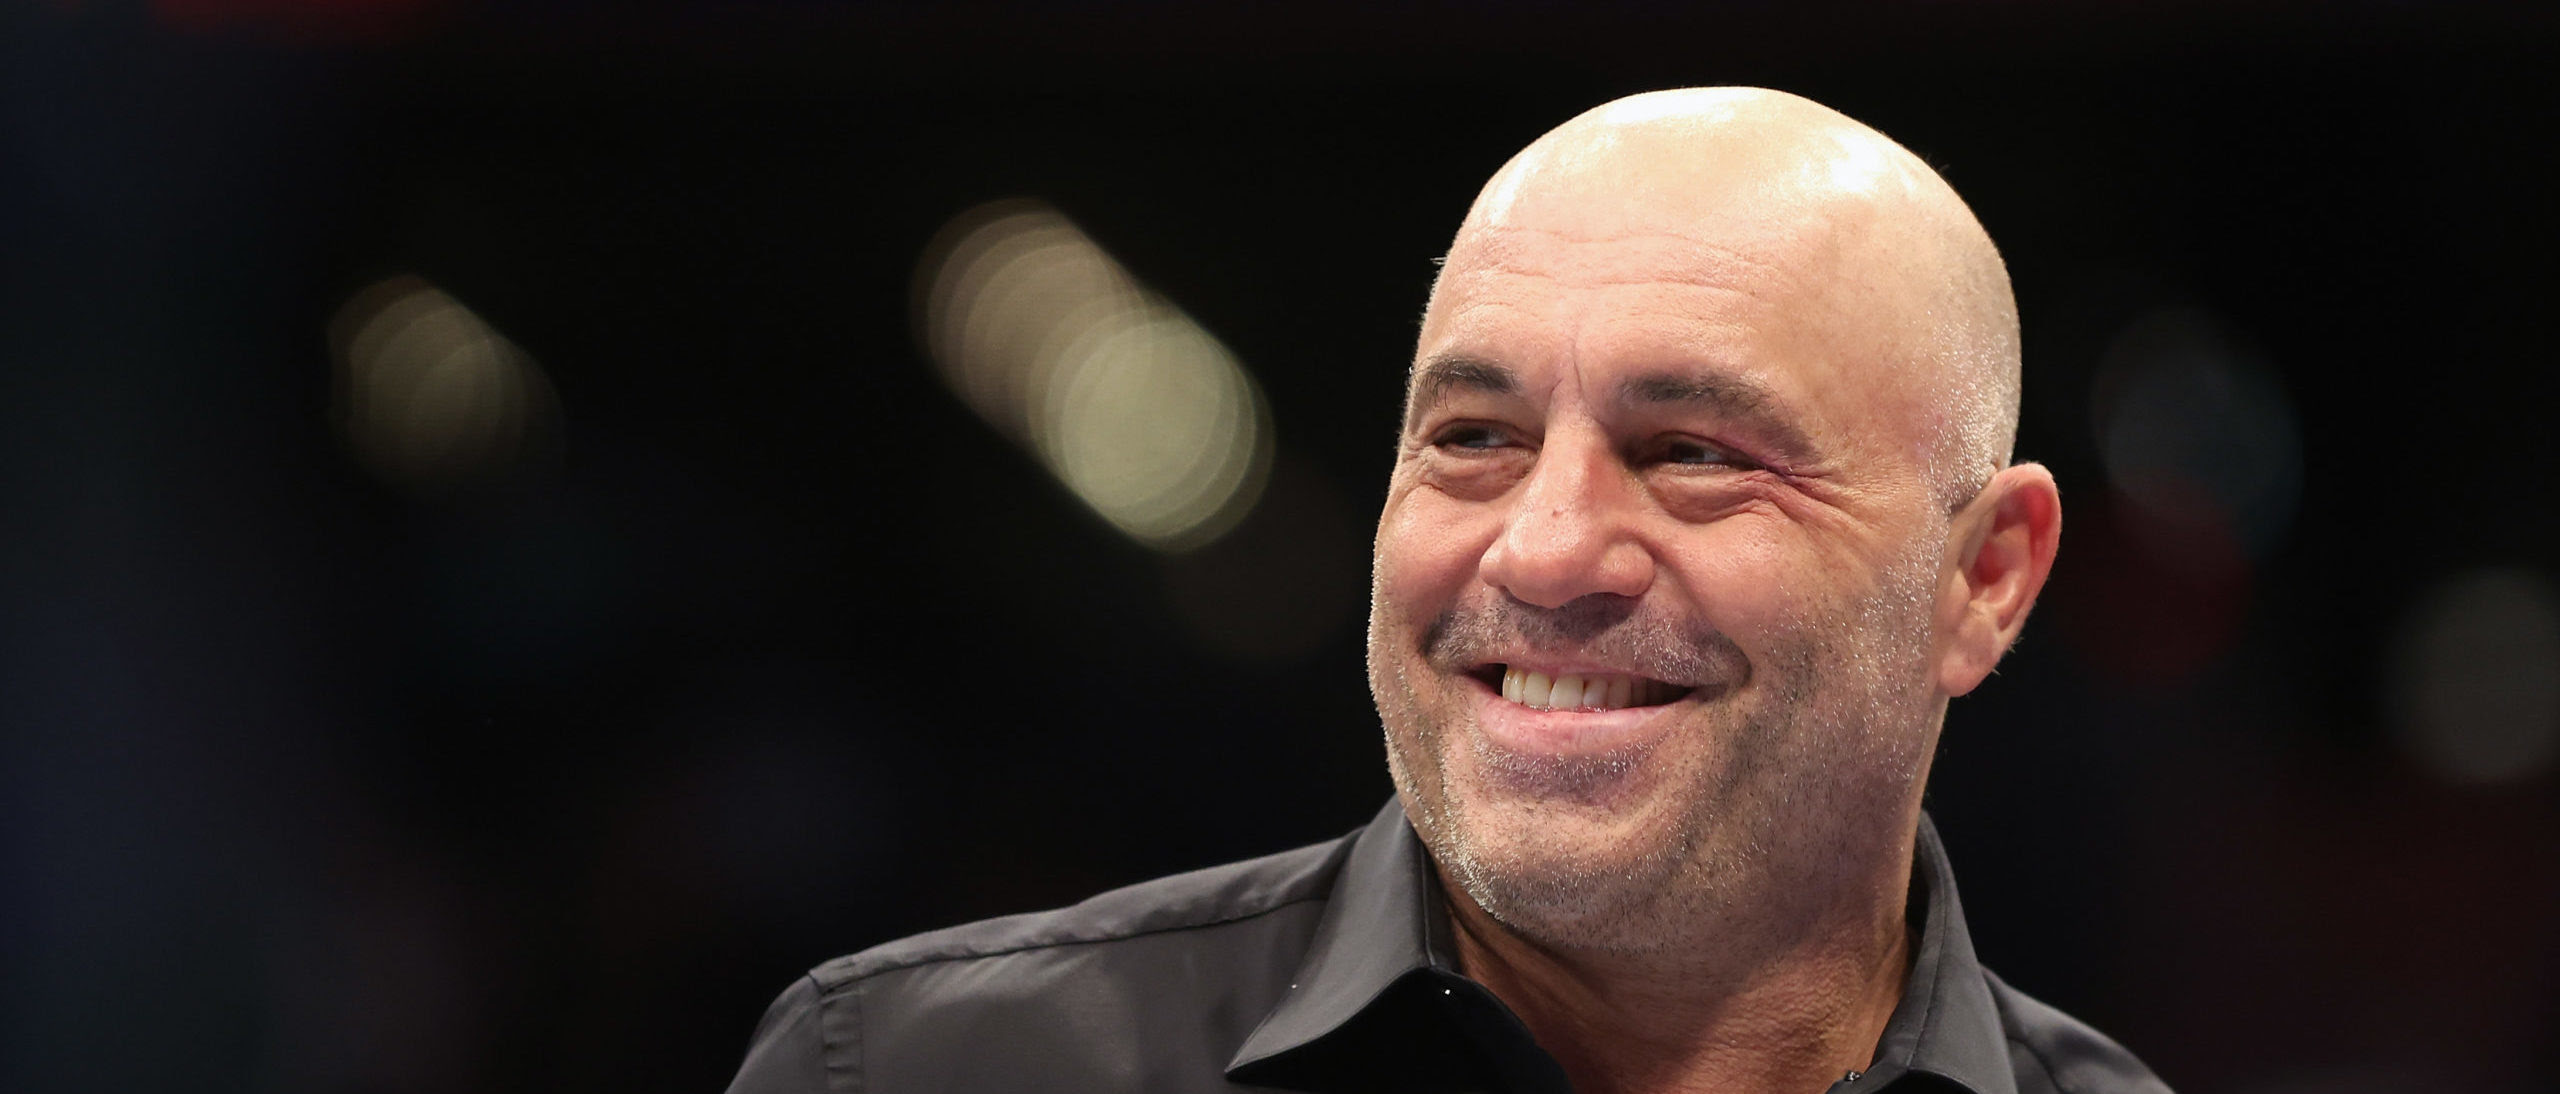 36 Episodes Of Joe Rogan’s Podcast Disappear From Platform. Spotify Says It’s Due To ‘Technical Issue’